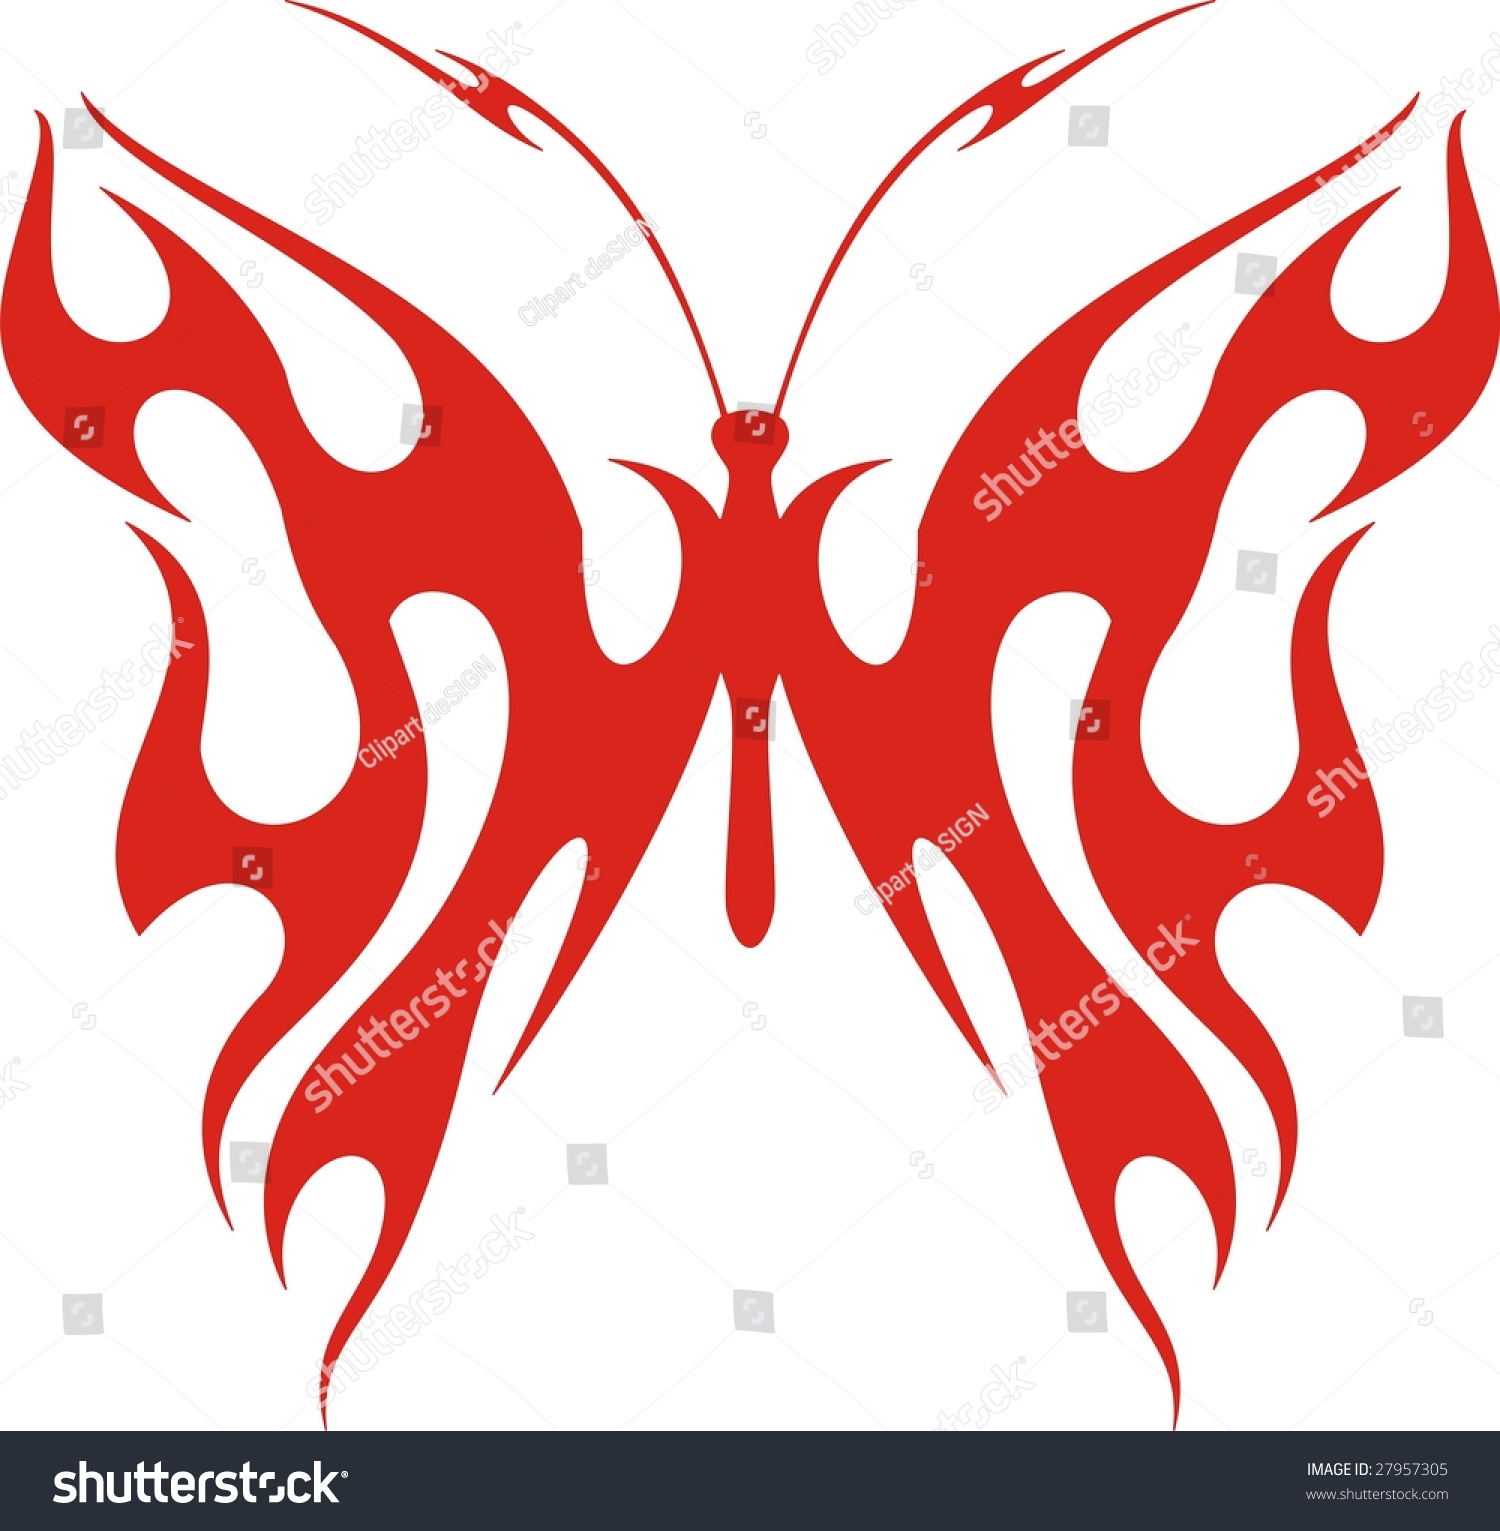 Flaming Butterfly Vector Illustration, Great For Vehicle Graphics ...